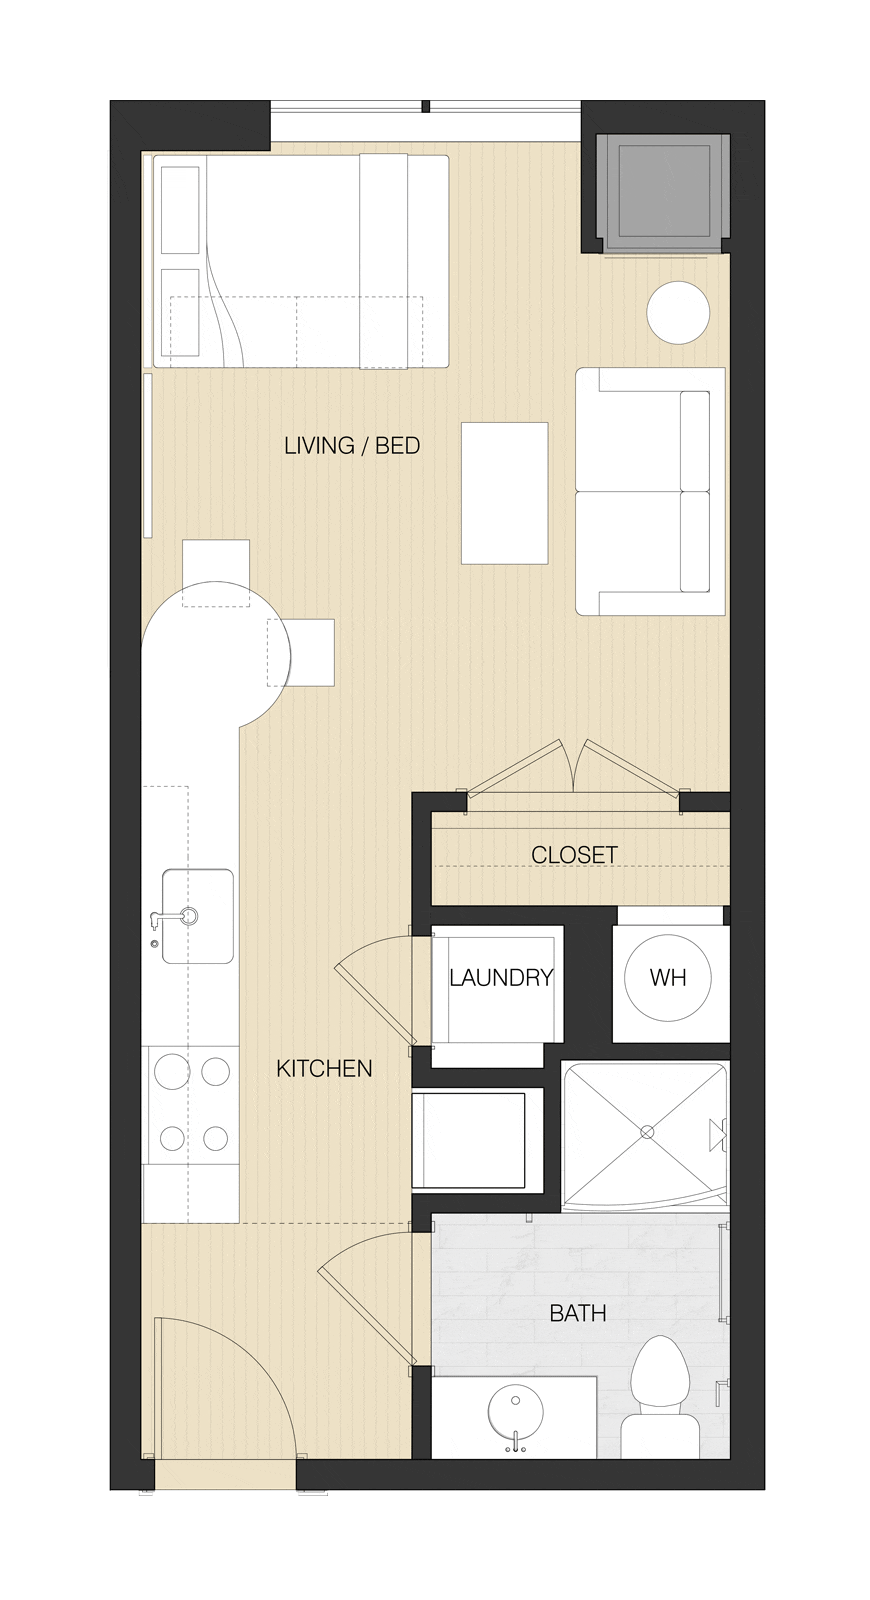 Temple Student 3 Bedroom Apartments